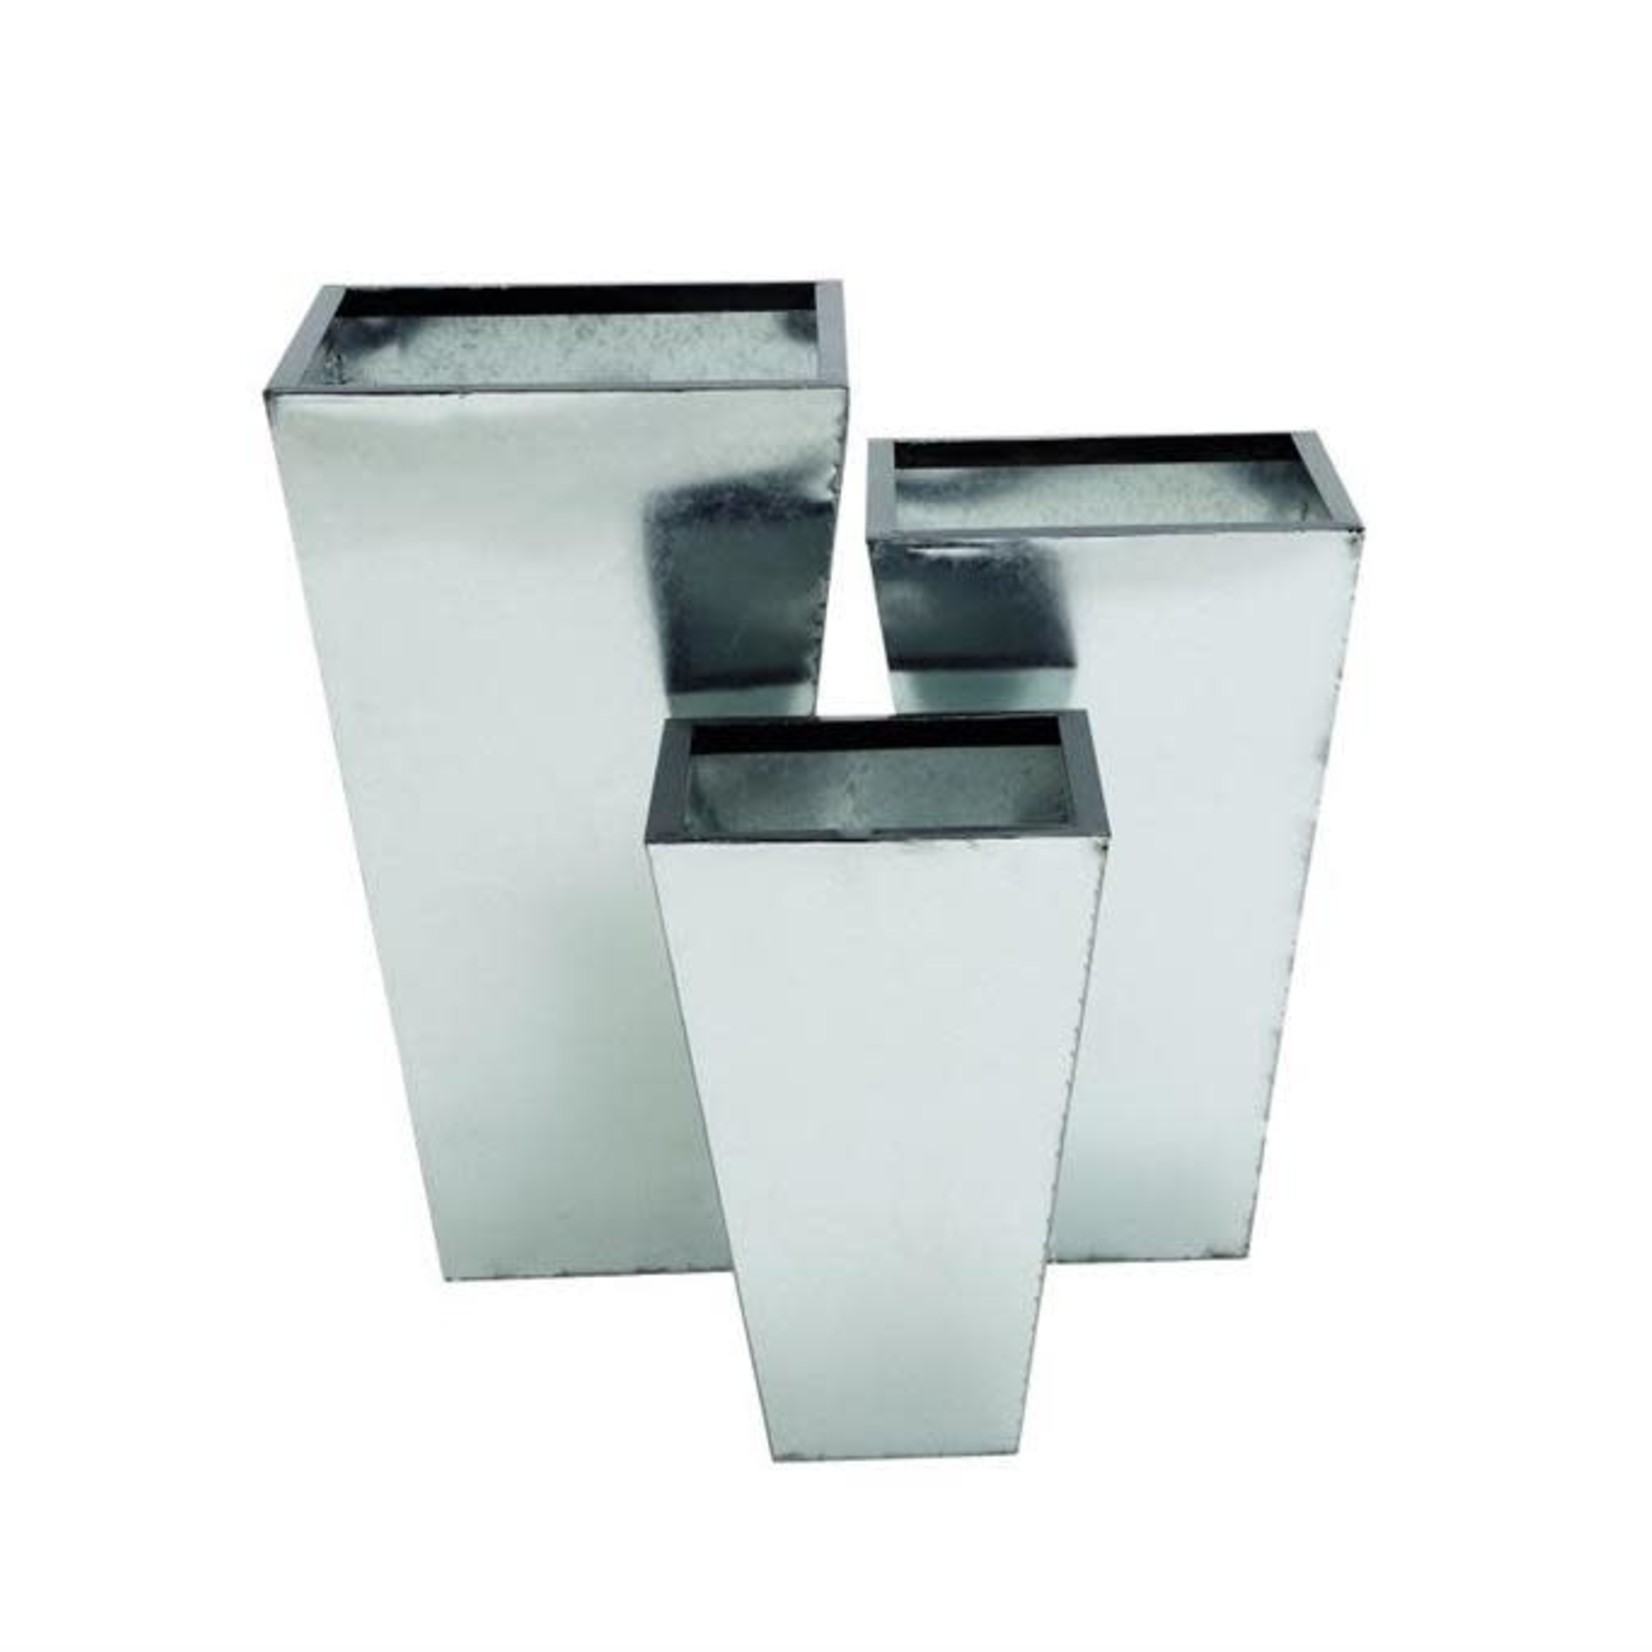 50% OFF WAS $70 NOW $34.99, 21”h x 13” SILVER METAL PLANT STAND